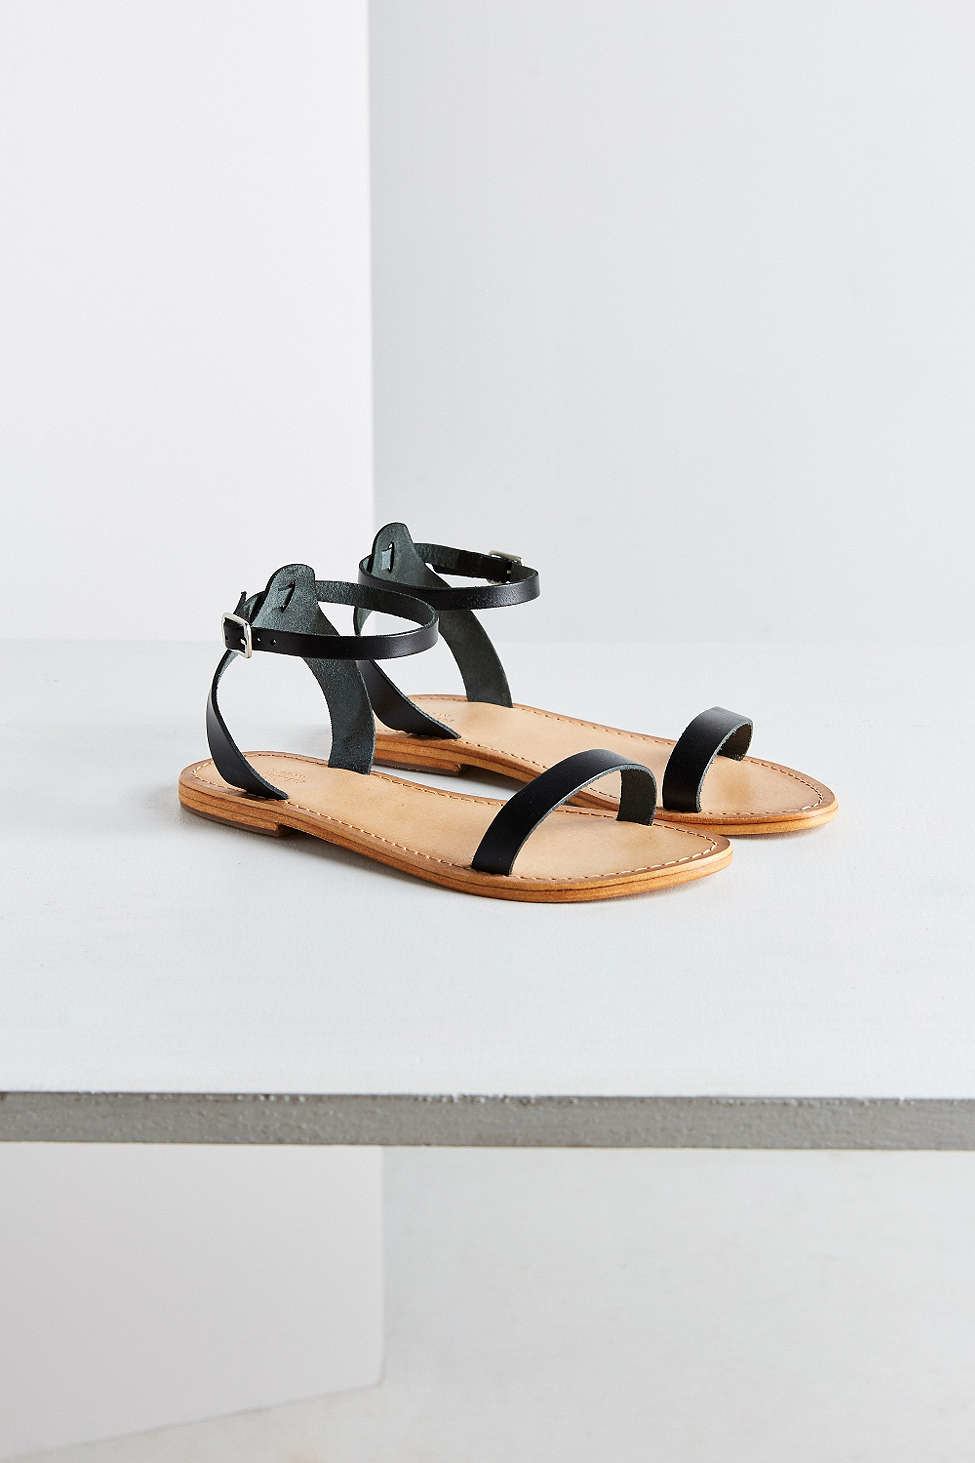 Urban Outfitters Hazel Leather Thin Strap Sandal in Black - Lyst